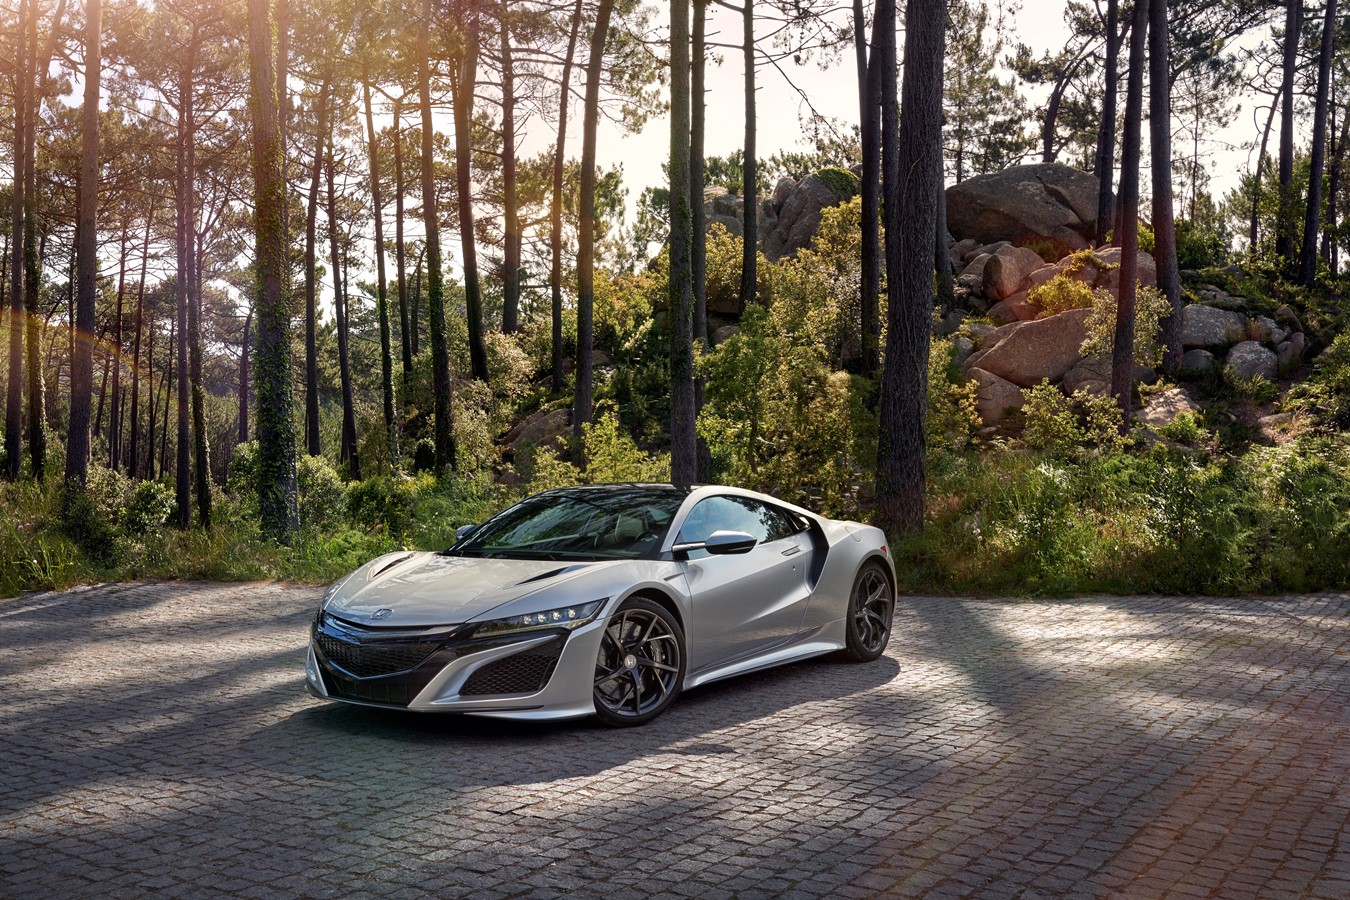 Honda Announces Next Delivery of NSX to UK